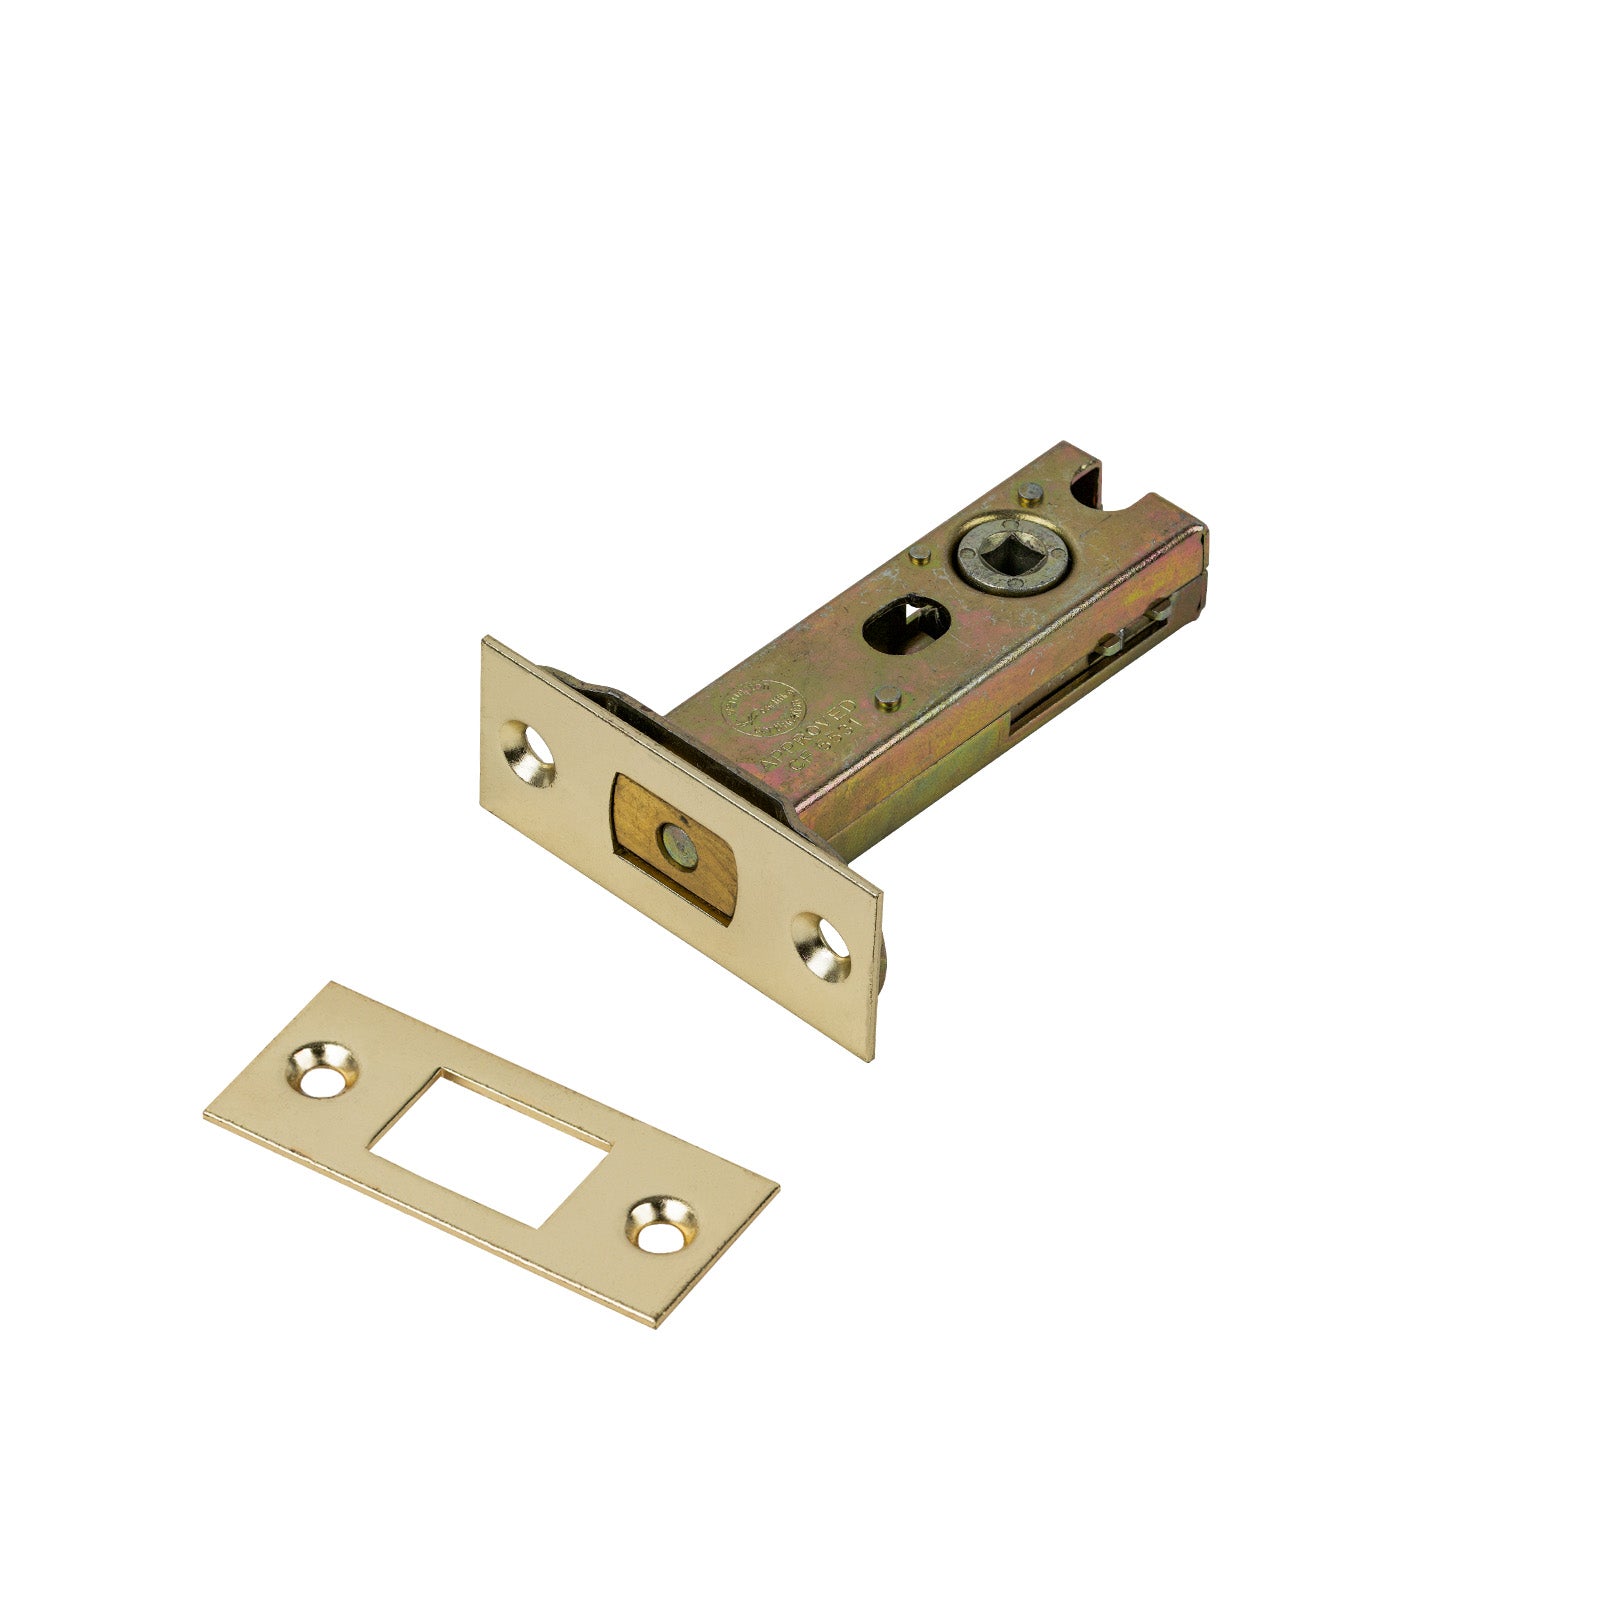 SHOW Bathroom Deadbolt - 3 Inch with Polished brass finished forend and striker plate